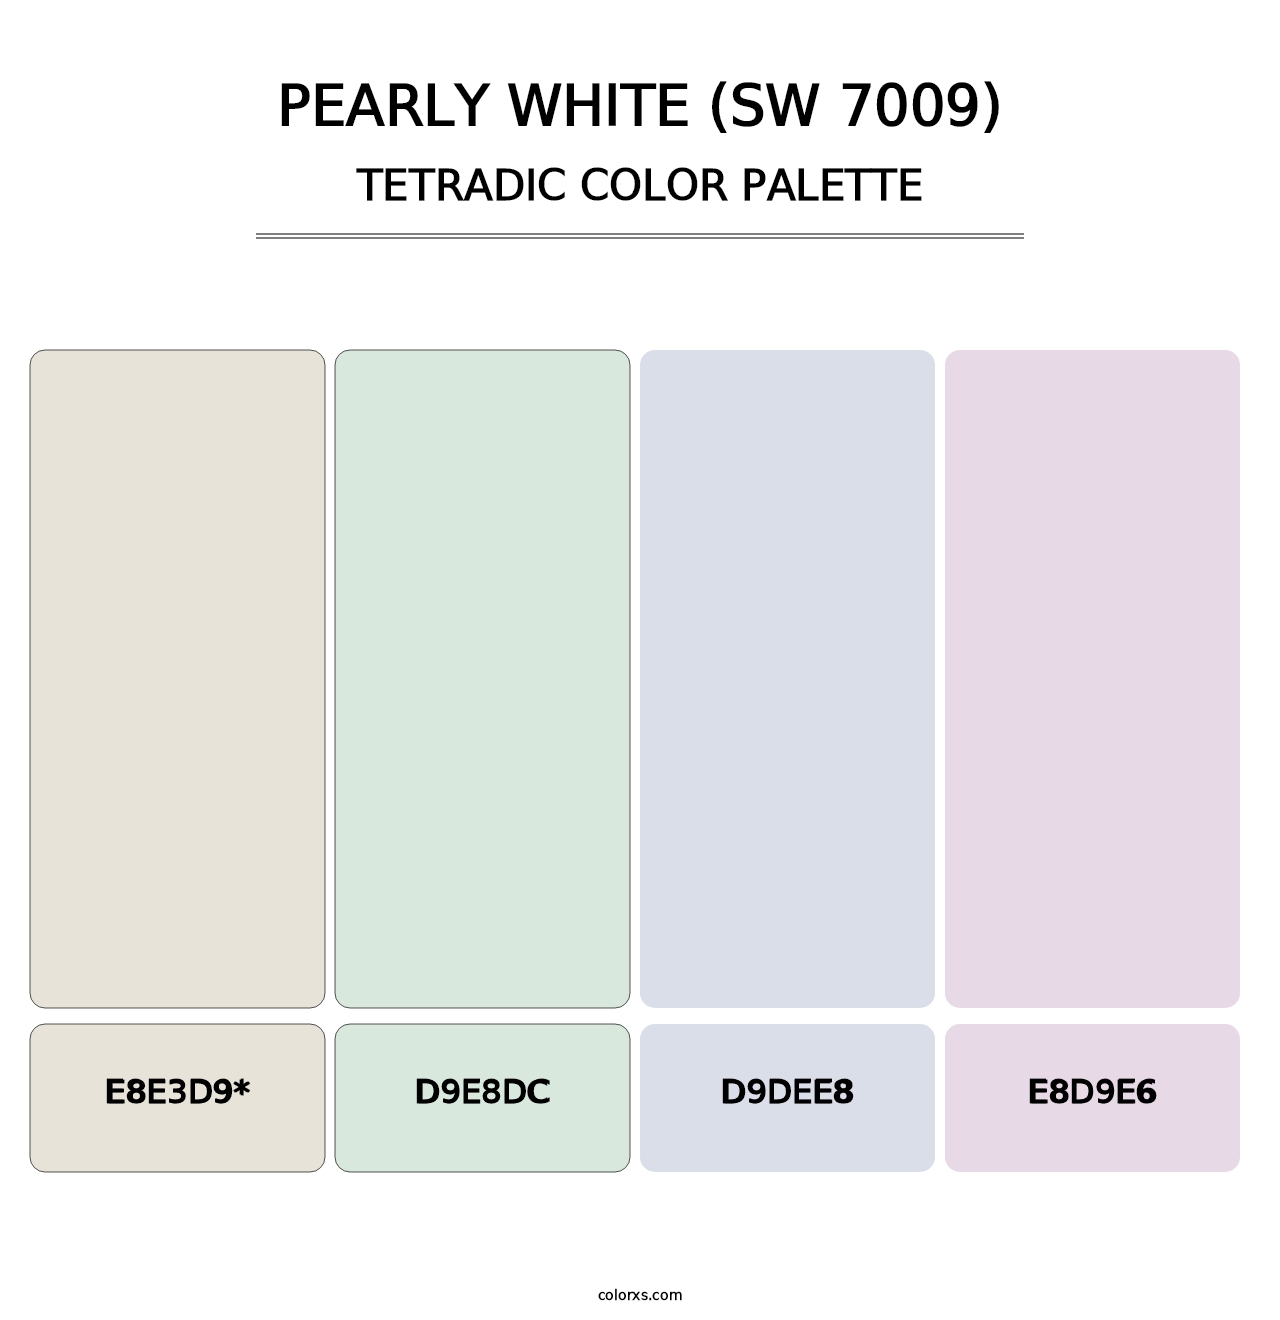 Pearly White (SW 7009) - Tetradic Color Palette